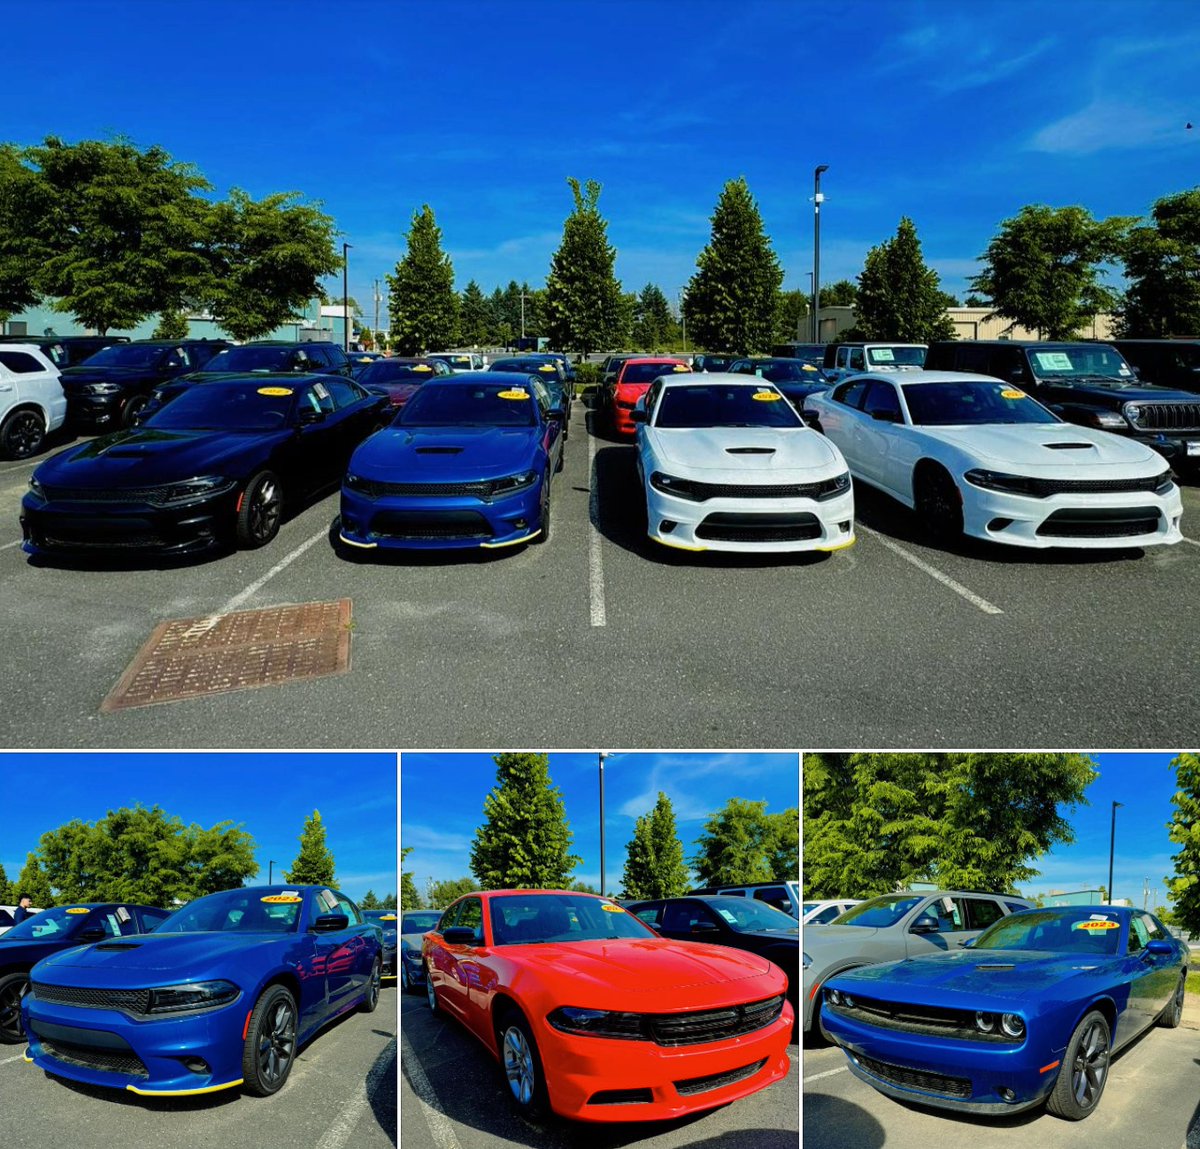 ALL DODGE INVENTORY MUST GO 🔥😎 Don't miss your chance to own a part of #Dodge history 🚘 Head into summer in the vehicle of your dreams! #Tvillecjdr #Auto #DodgeCharger #DodgeChallenger